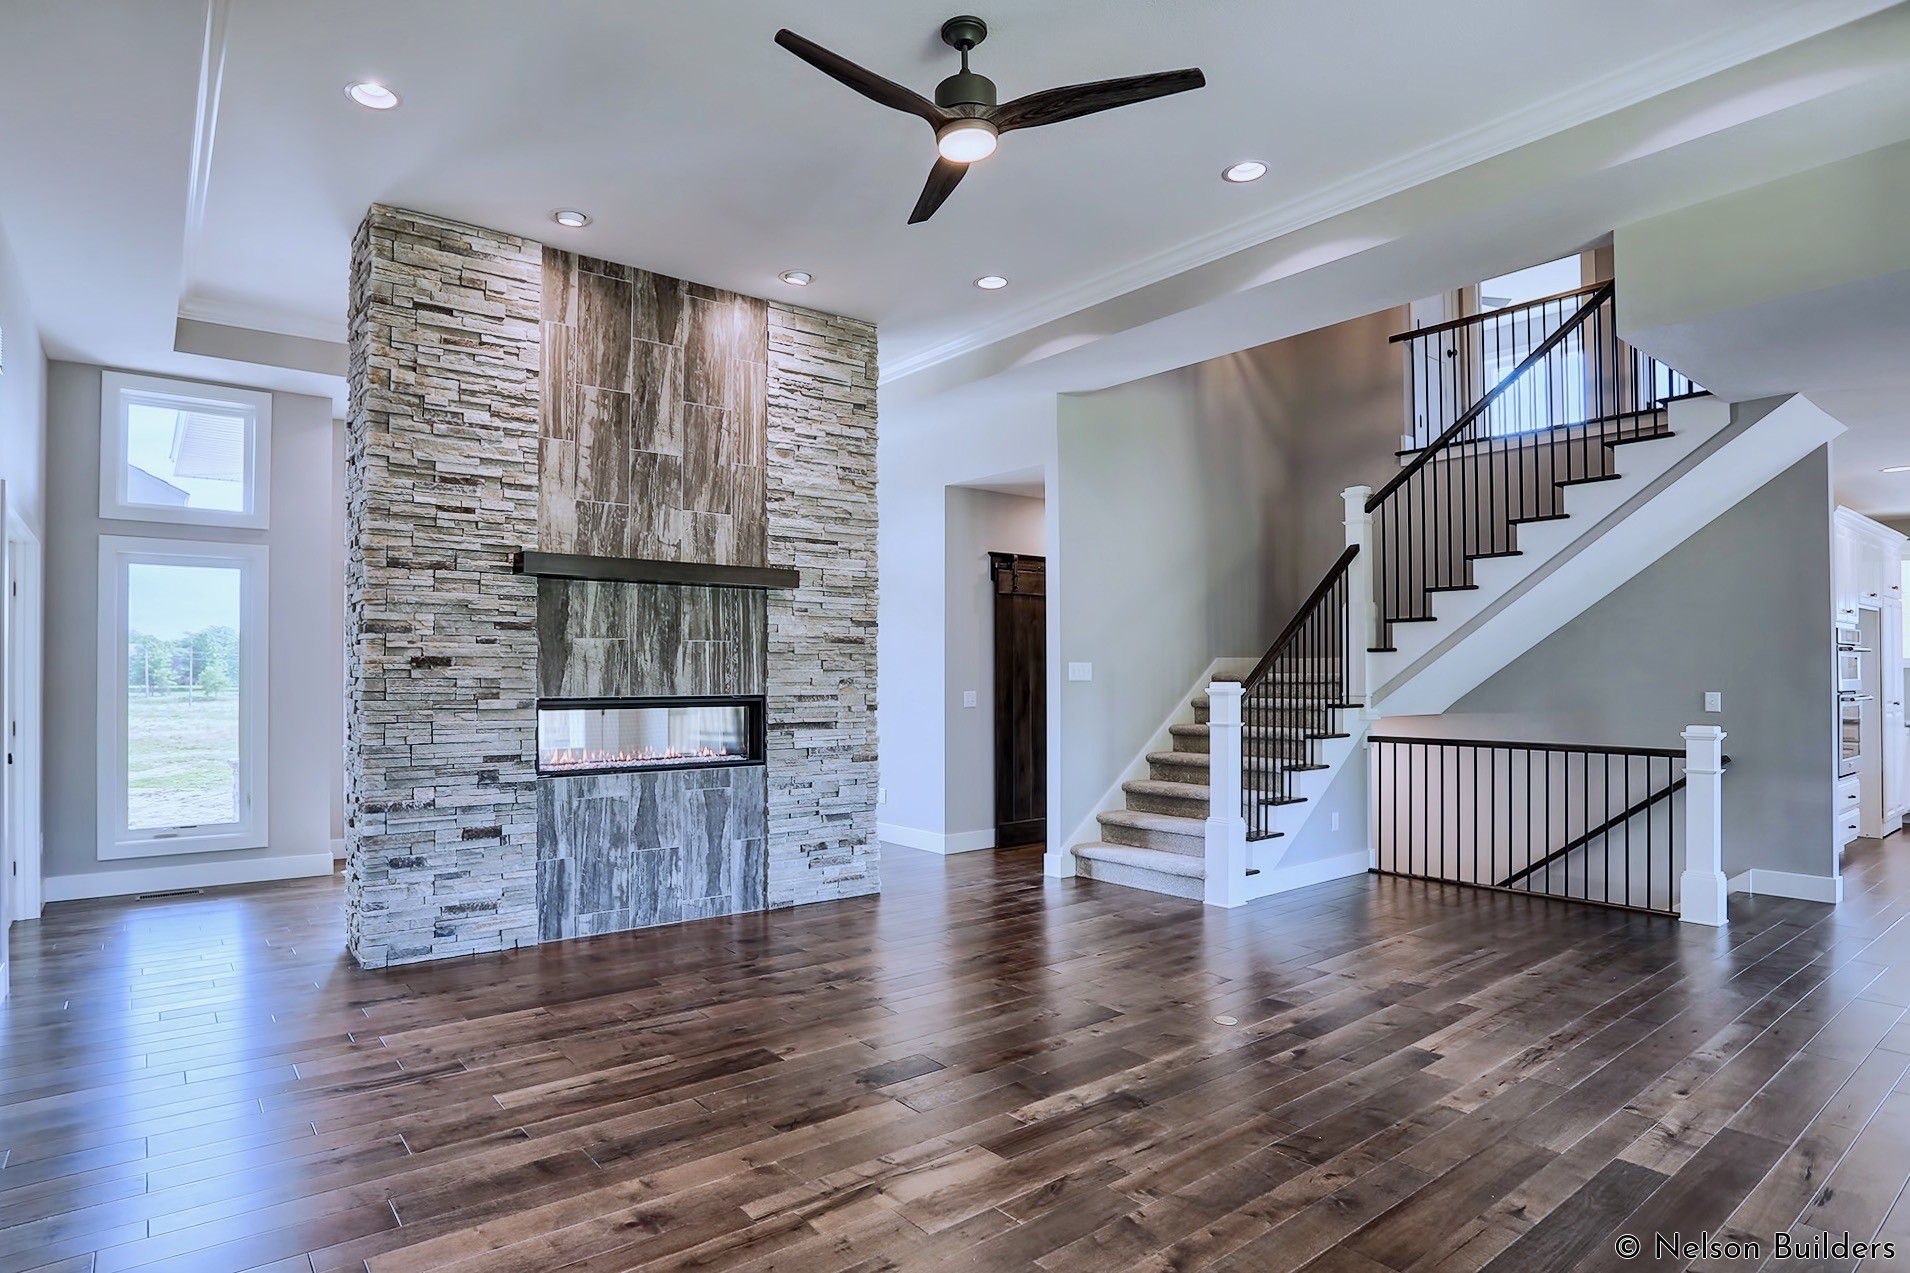 The double-sided linear fireplace is the focal point of both the entry and great room.